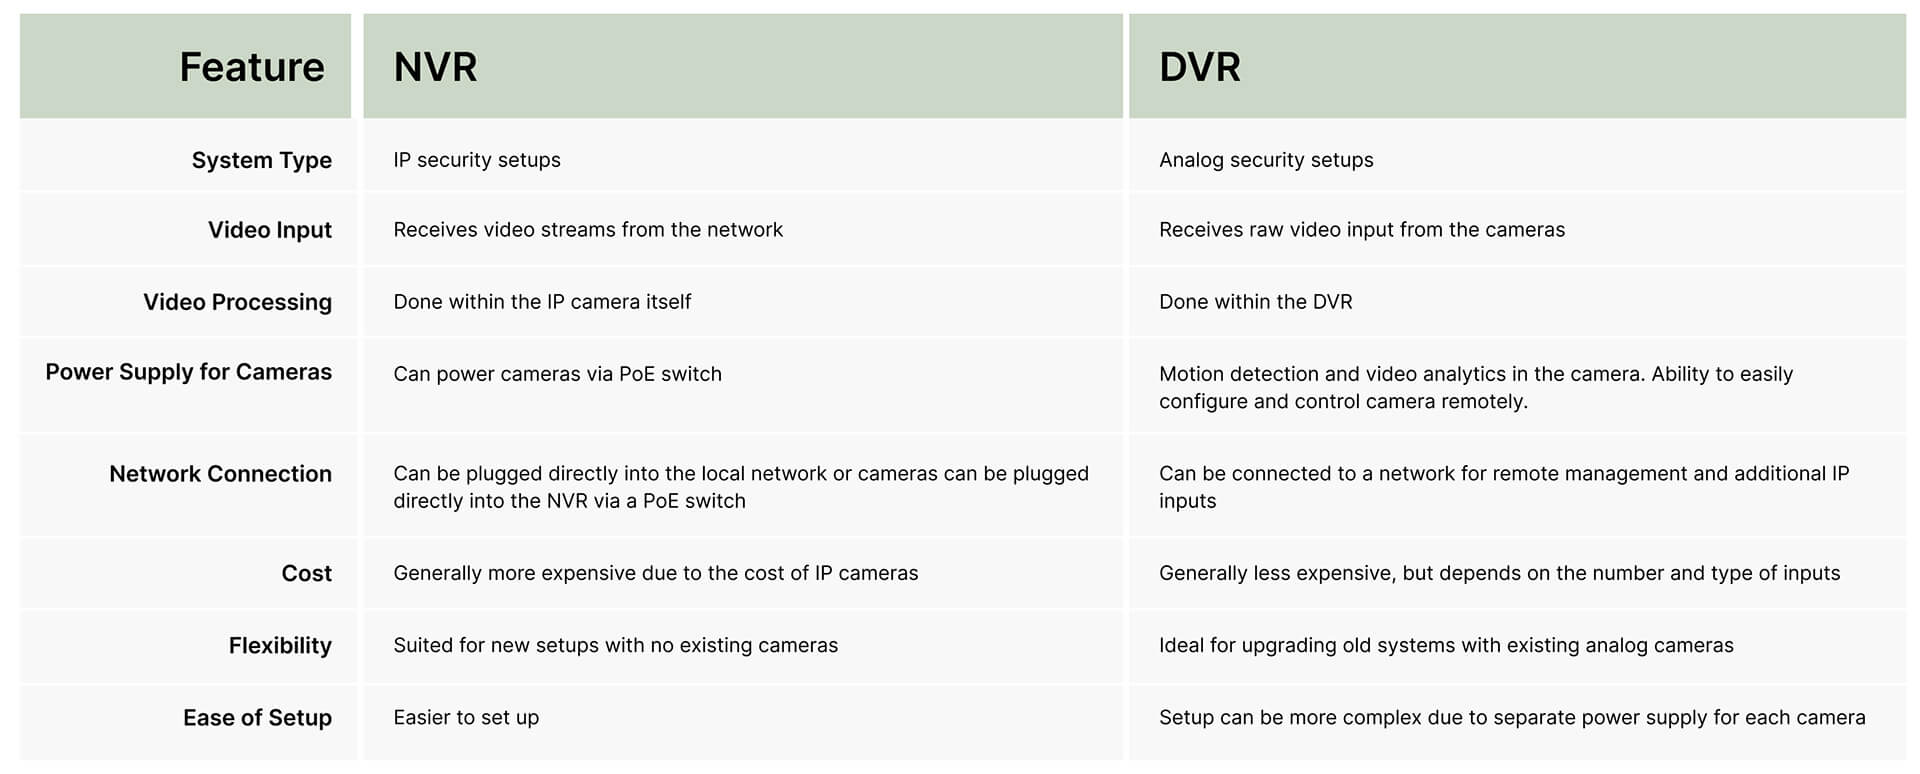 A comprehensive table comparing the features and functionalities of Network Video Recorders (NVRs) and Digital Video Recorders (DVRs).